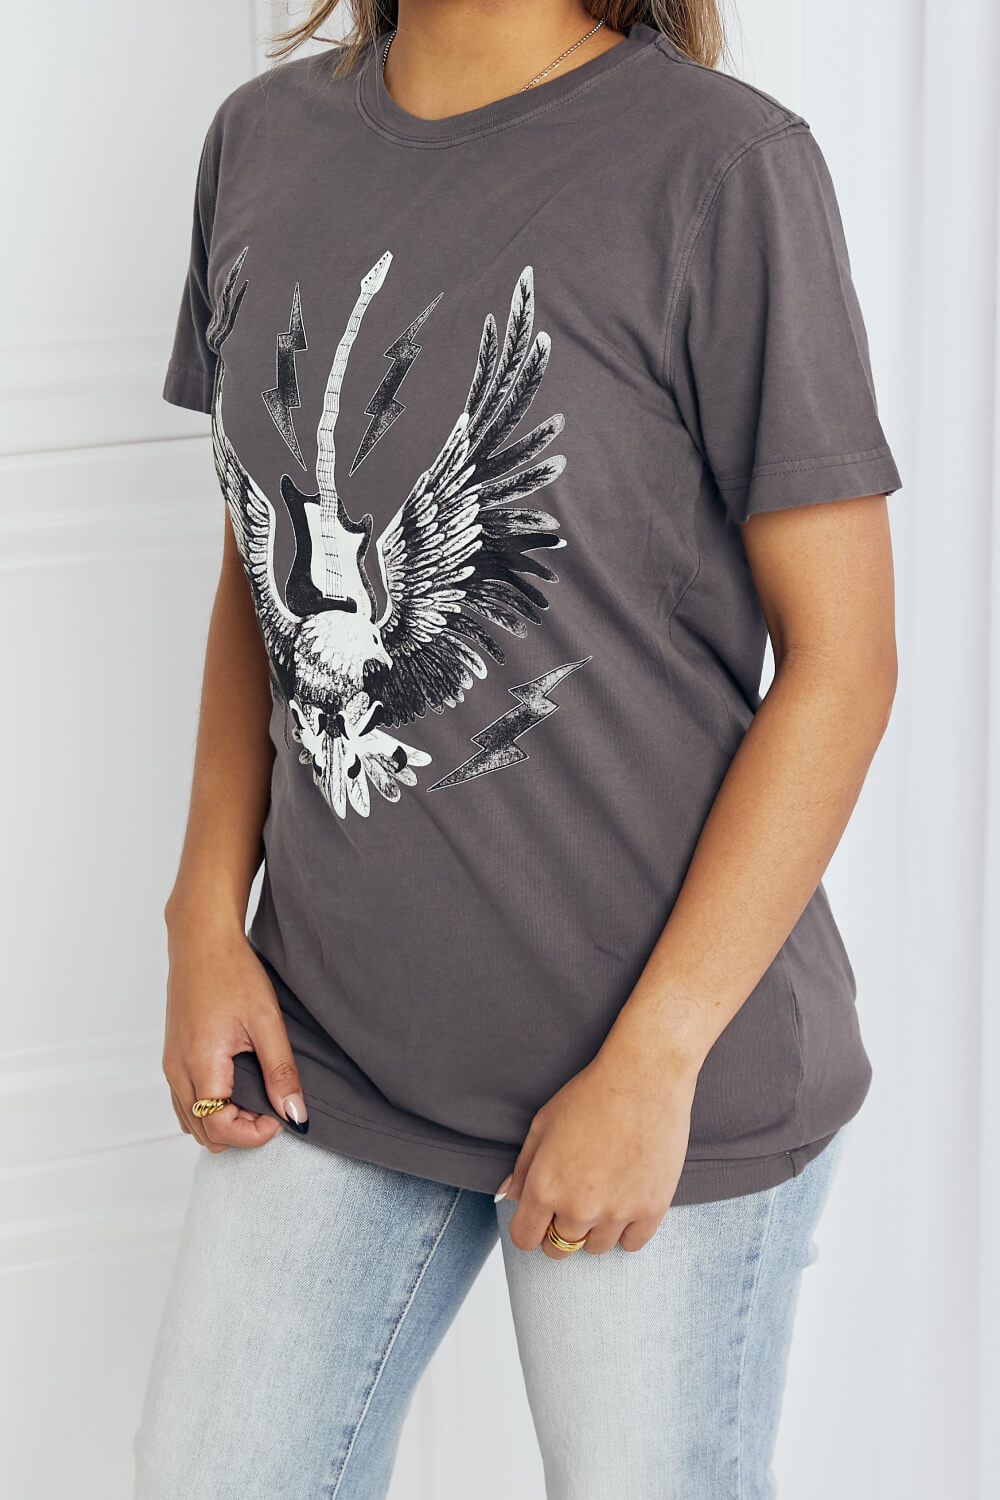 Eagle Graphic Tee Shirt in Charcoal